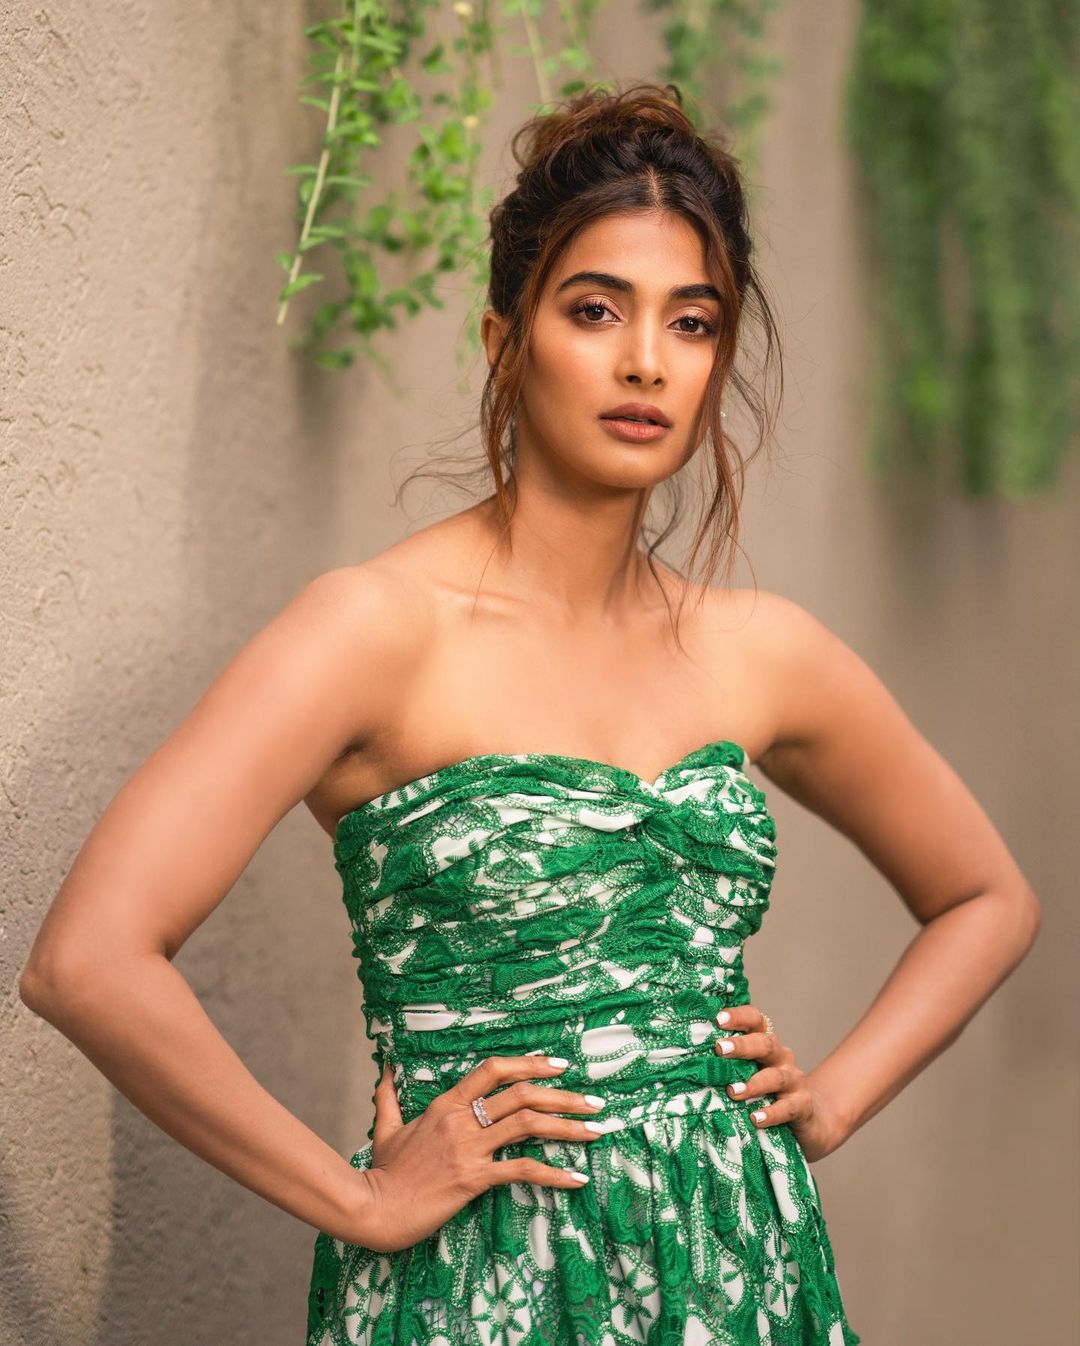 Pooja Hegde styles her hair into a messy updo to compliment the attire